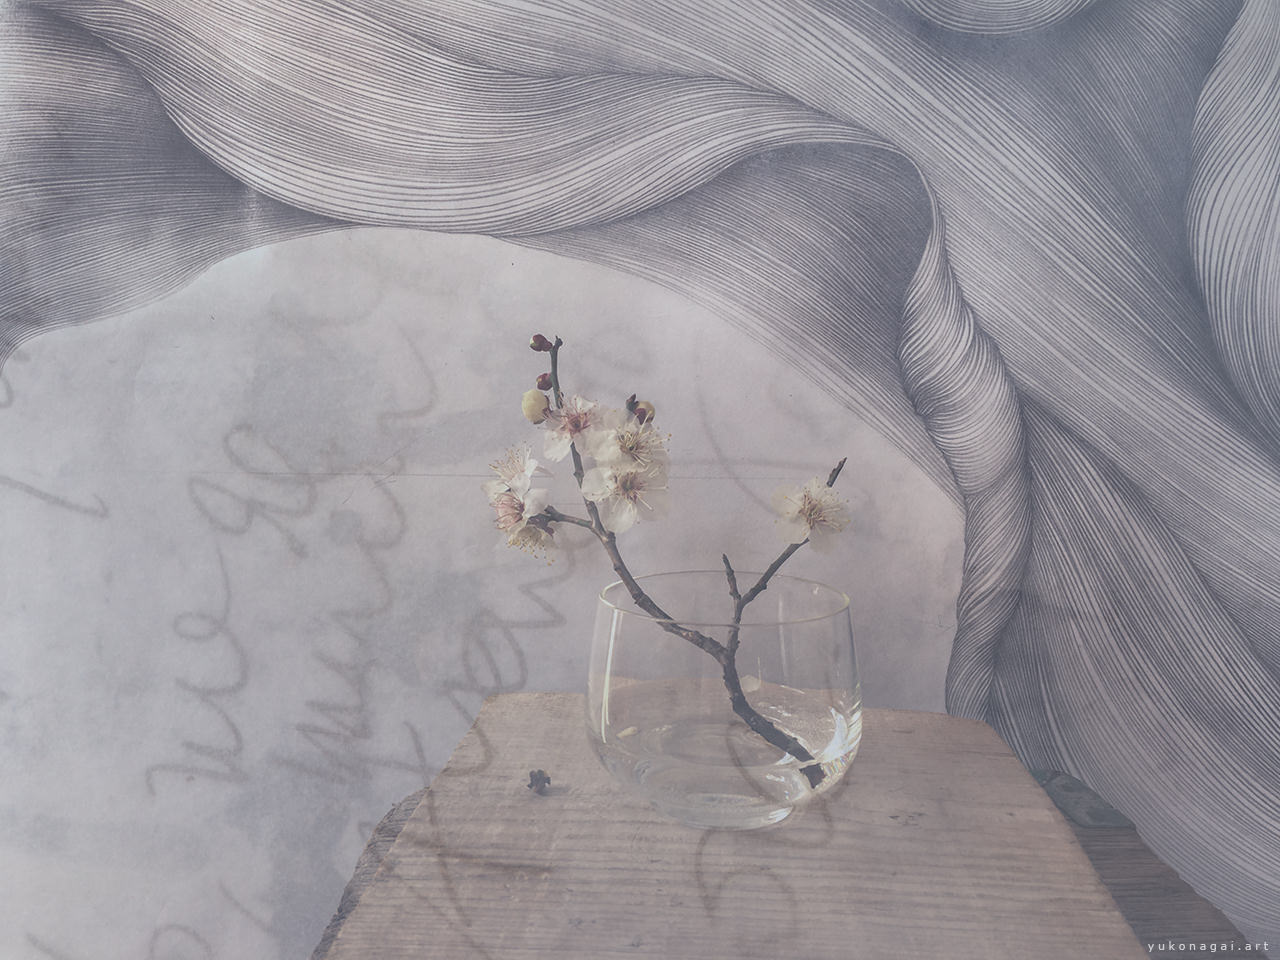 Hand-written letters layered over an abstract line drawing and Ume blossoms.